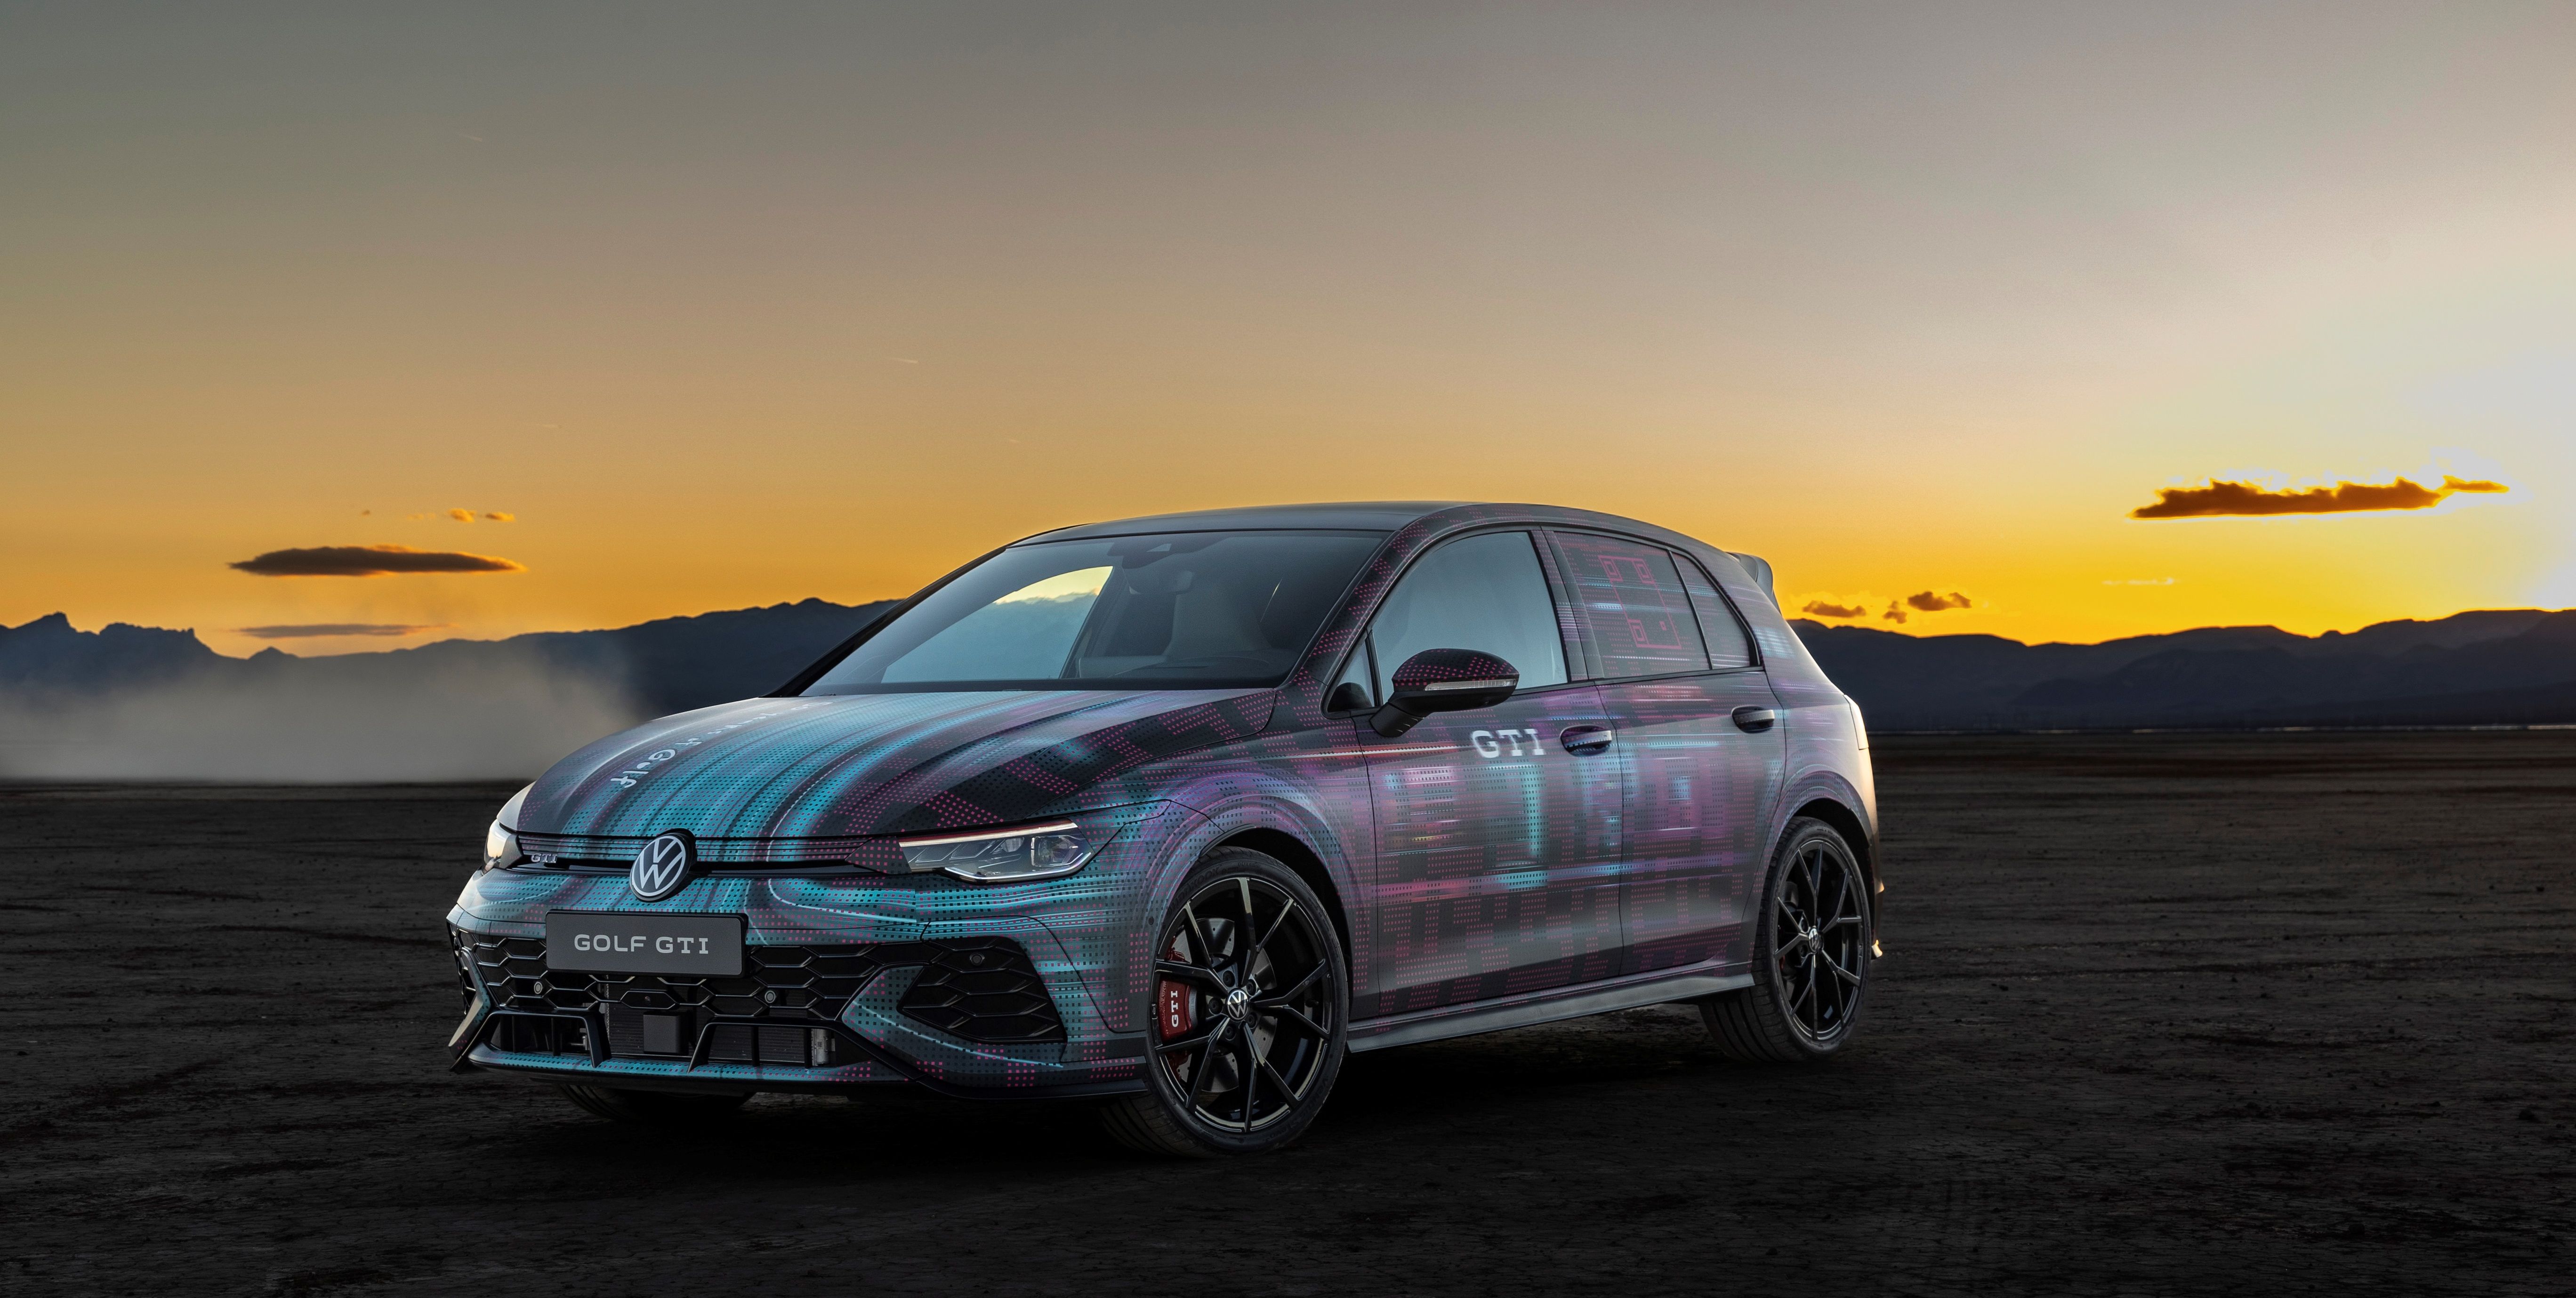 The Updated VW Golf GTI Mk. 8 Looks More Aggressive in Camo Photos